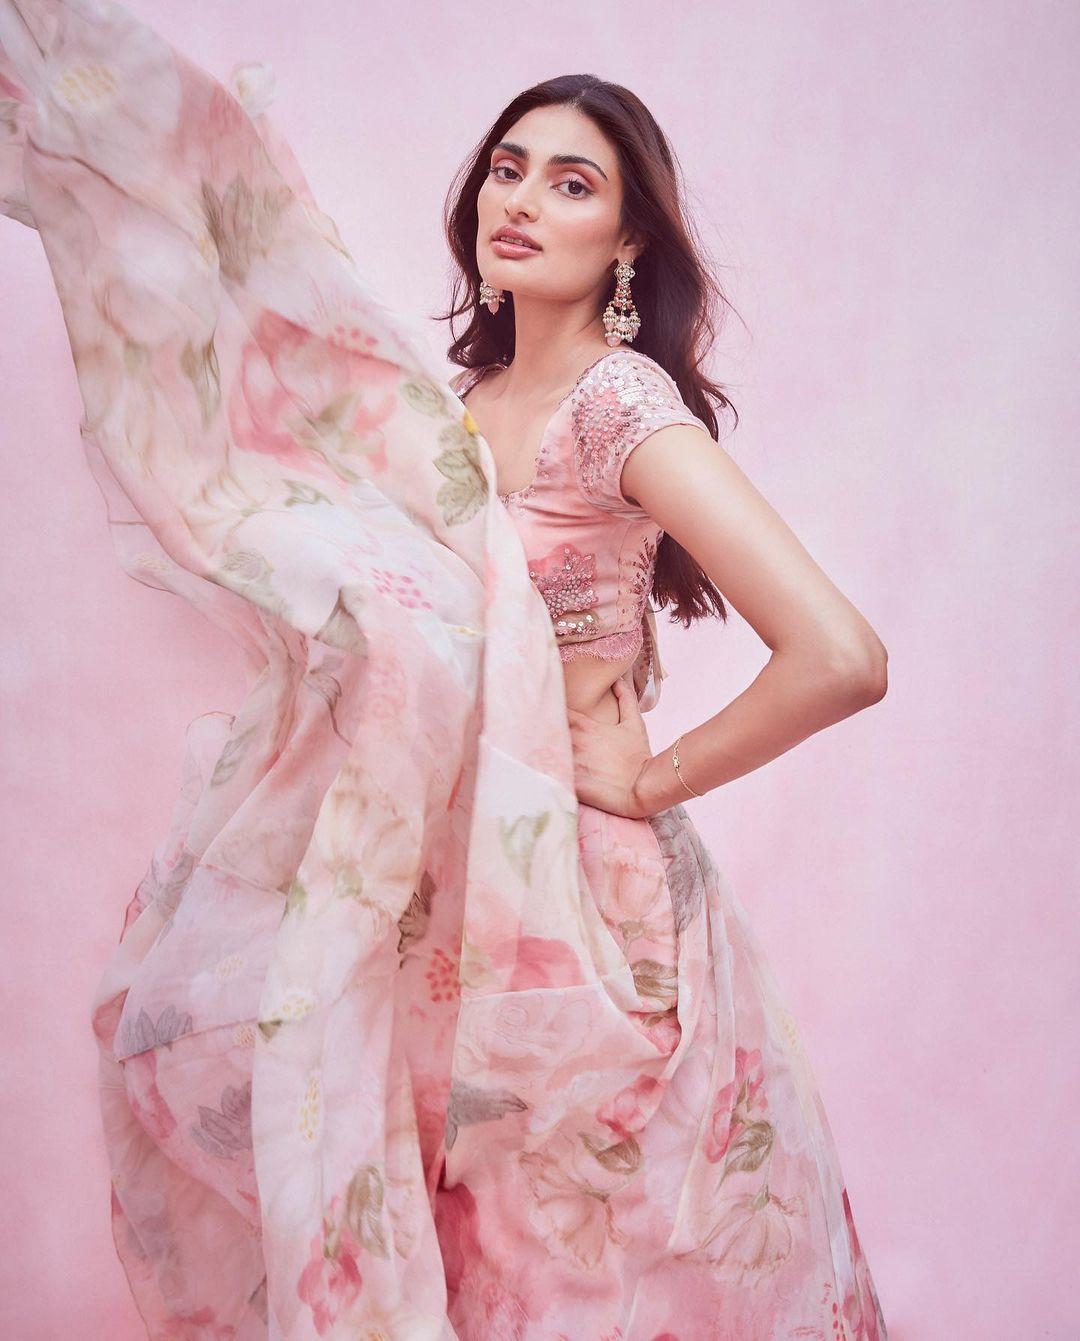 Athiya appeared stunning in a lovely floral lehenga. She's showcasing her fondness for traditional clothing in a beautiful pink floral-printed lehenga designed by Shehla Khan.